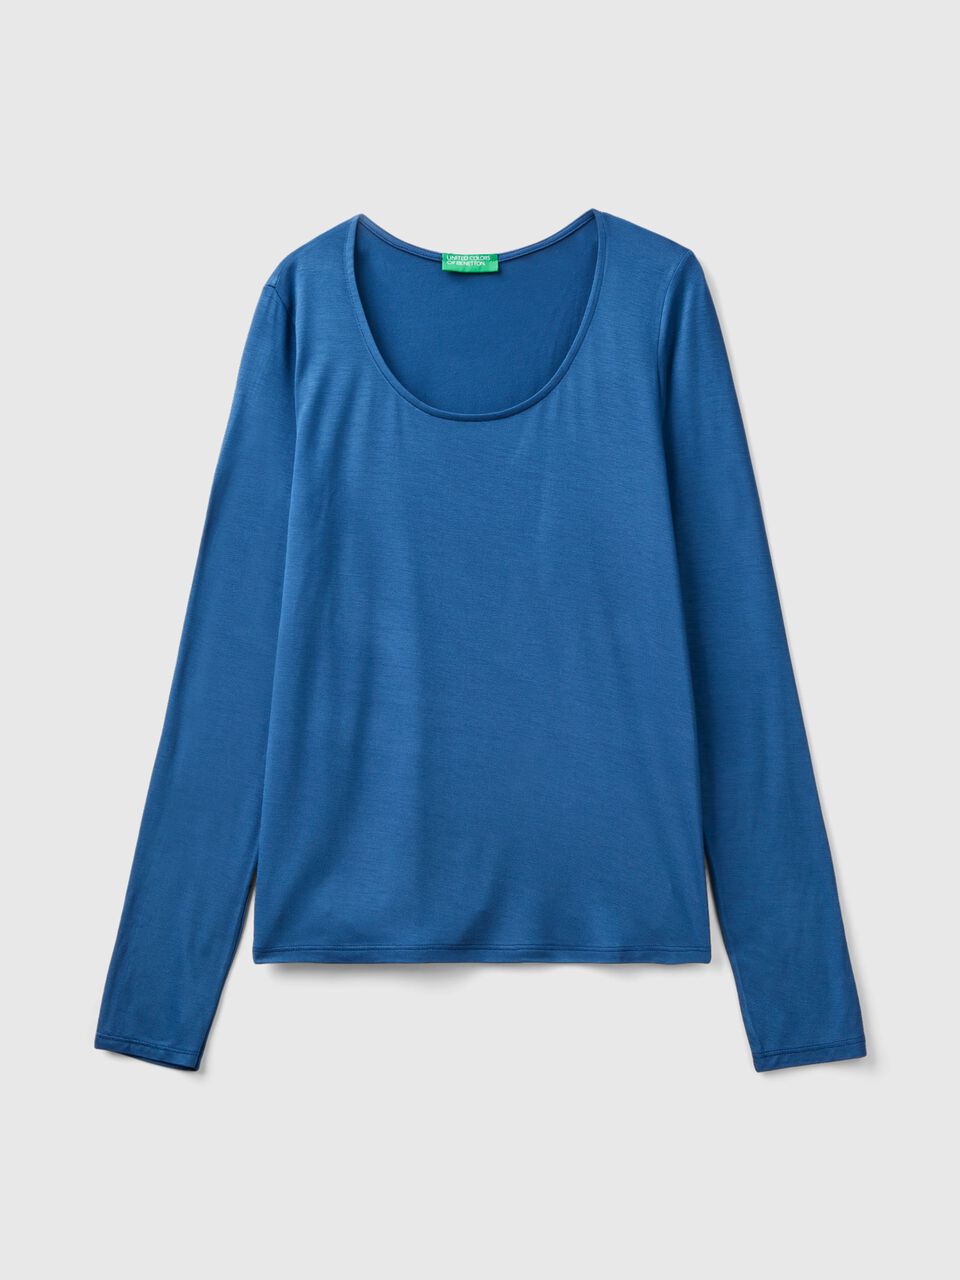 T-shirt in sustainable Blue - | viscose Benetton stretch Force Air